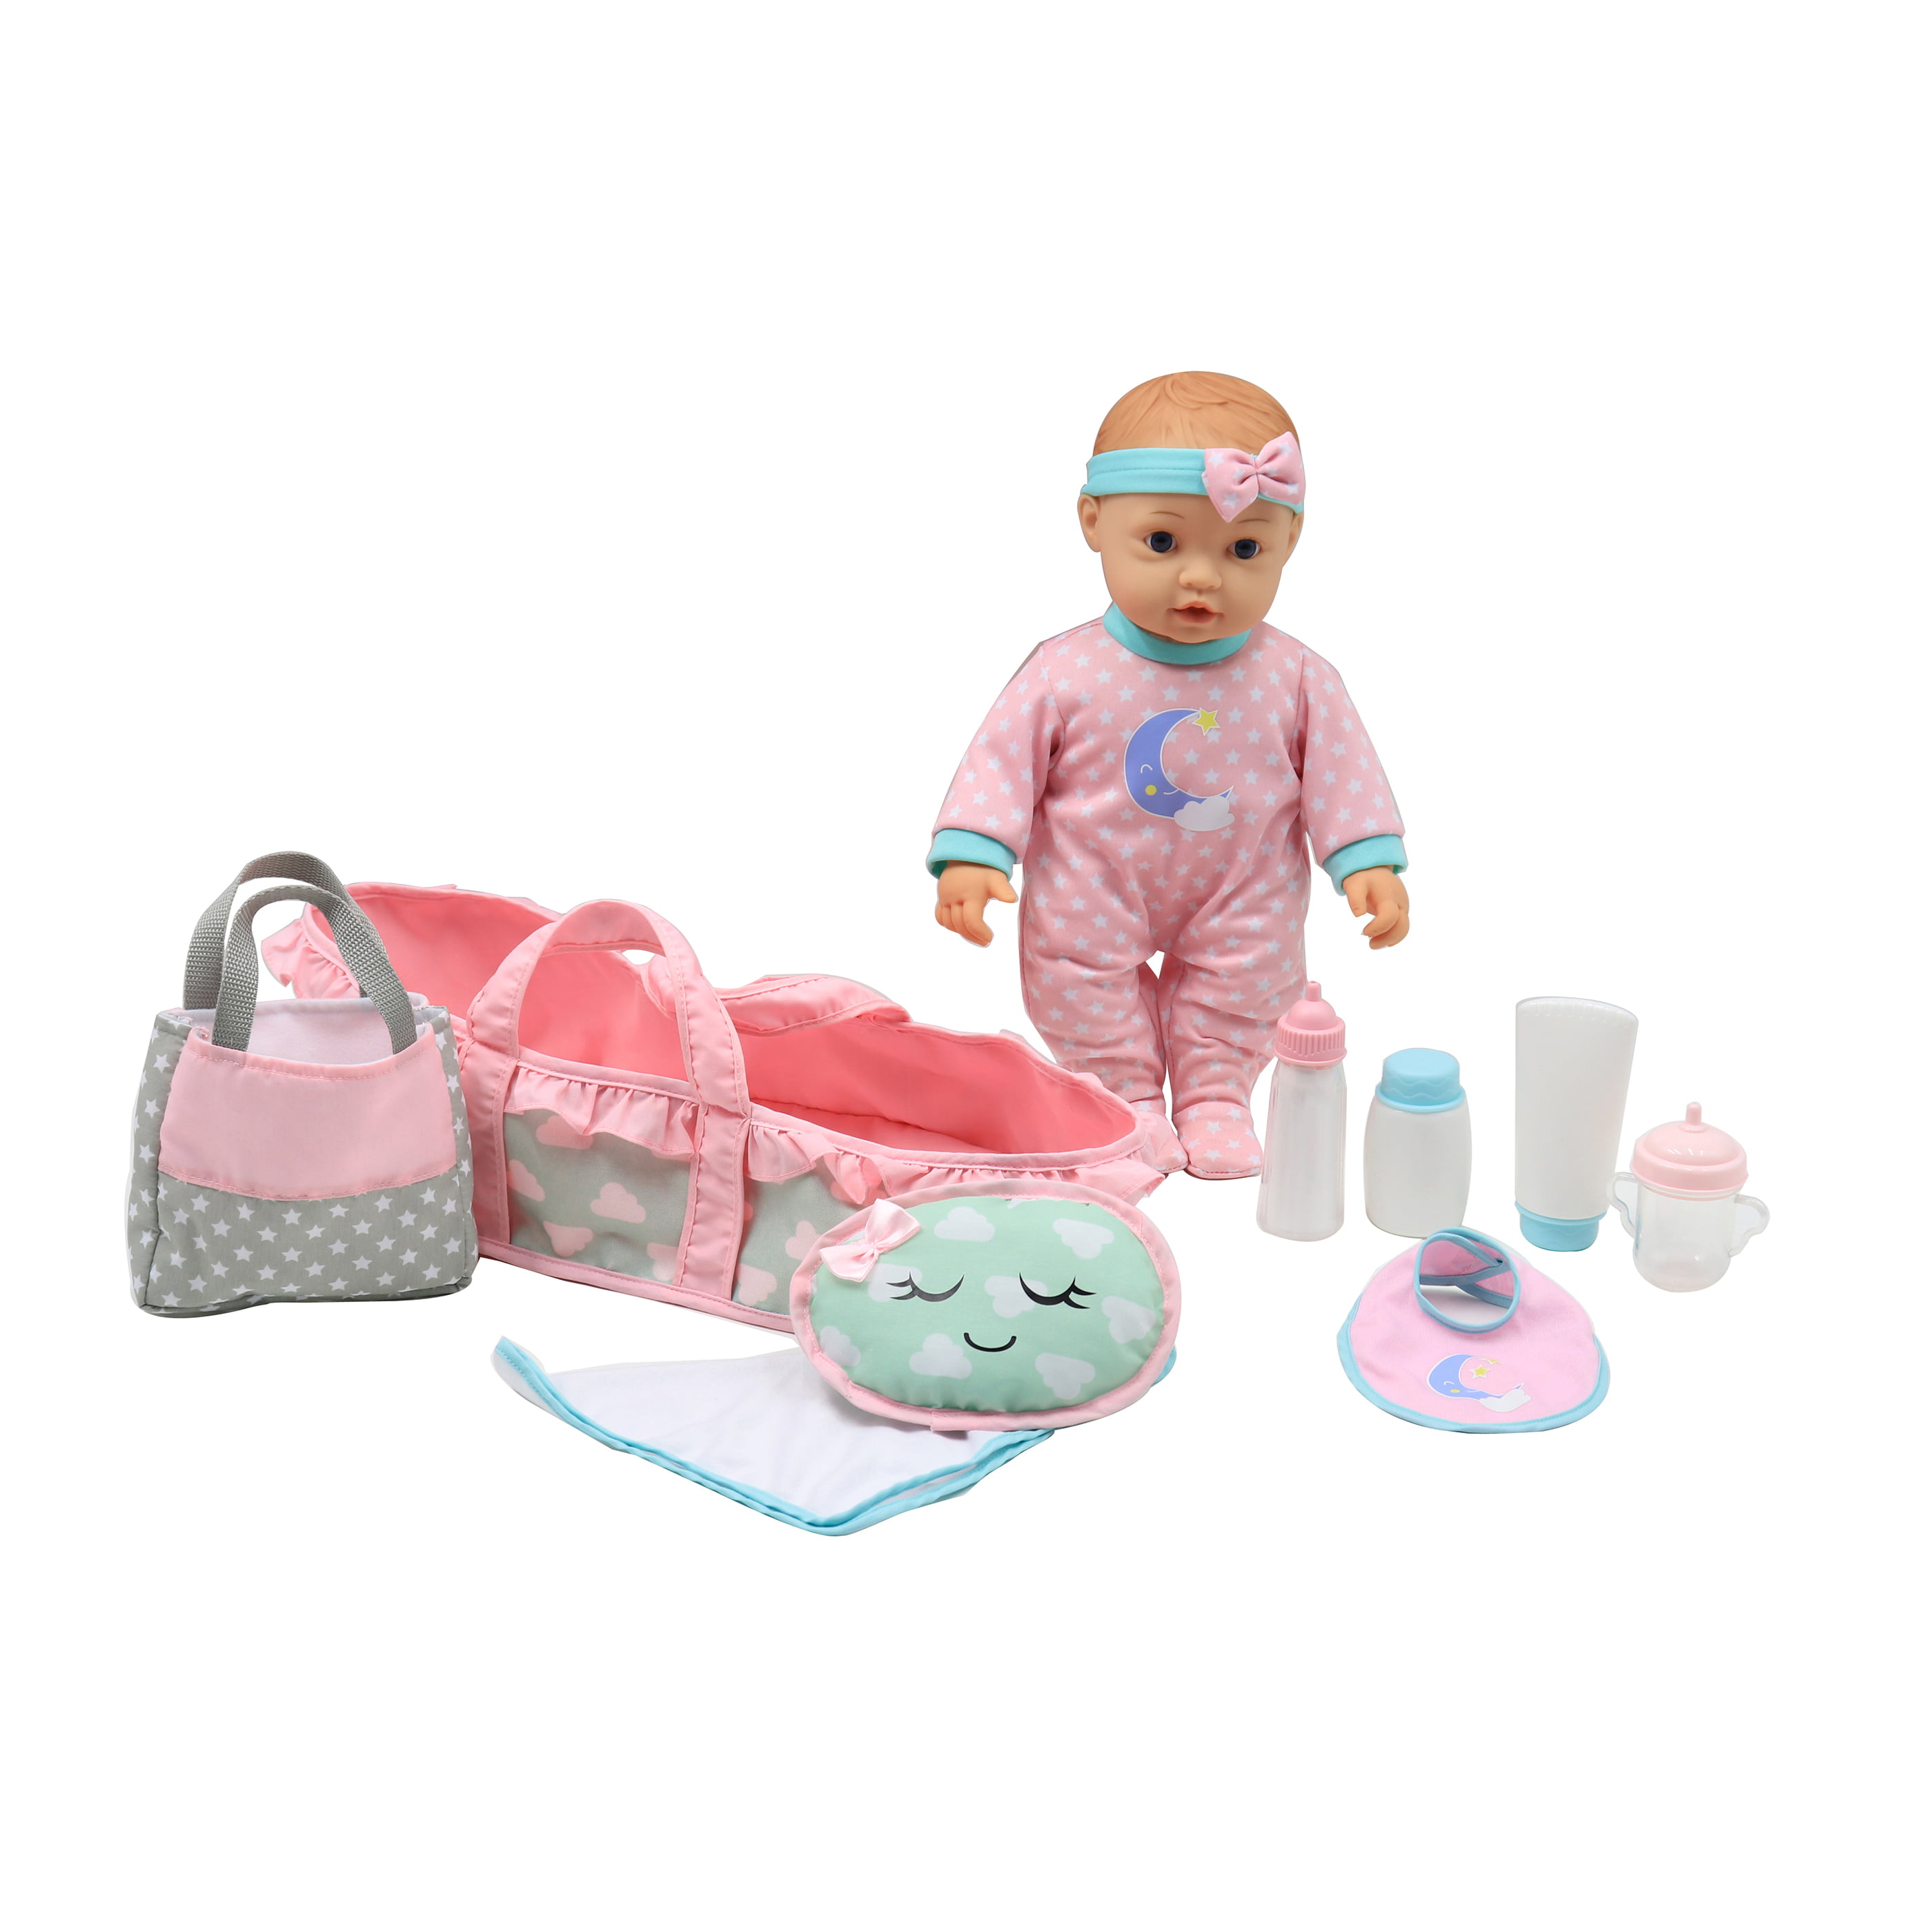 16 Baby Companion Doll Making Kit - A Child's Dream